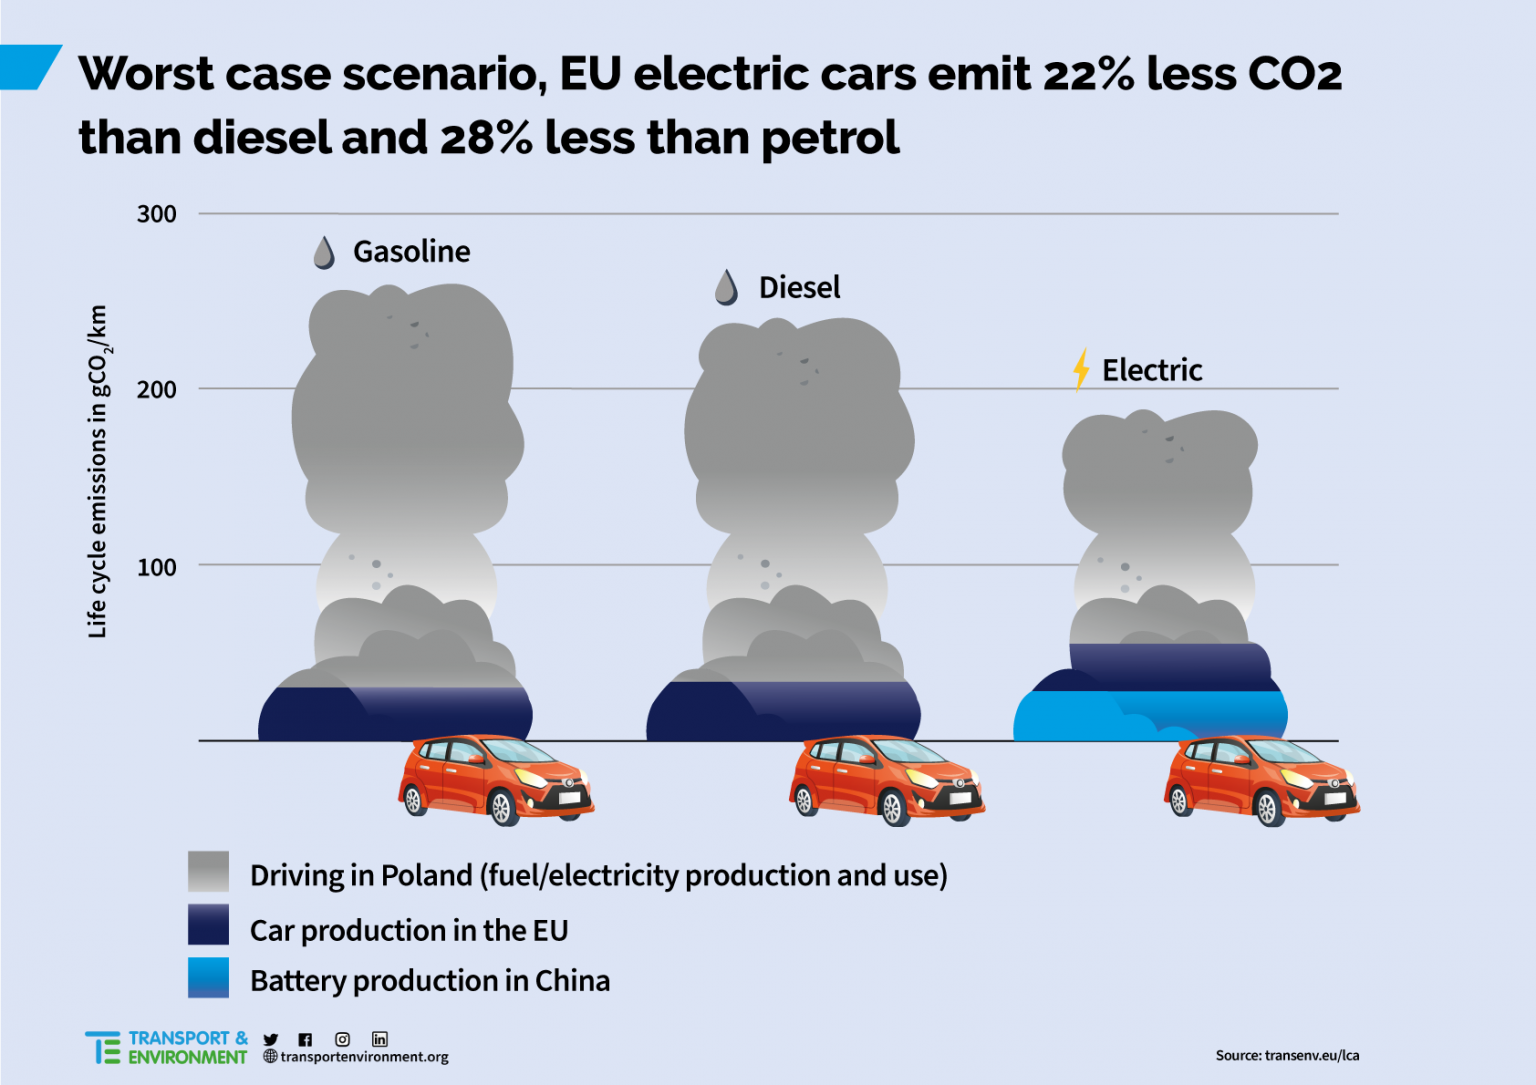 Lifecycle emissions of electric cars are fraction of fossilfuelled